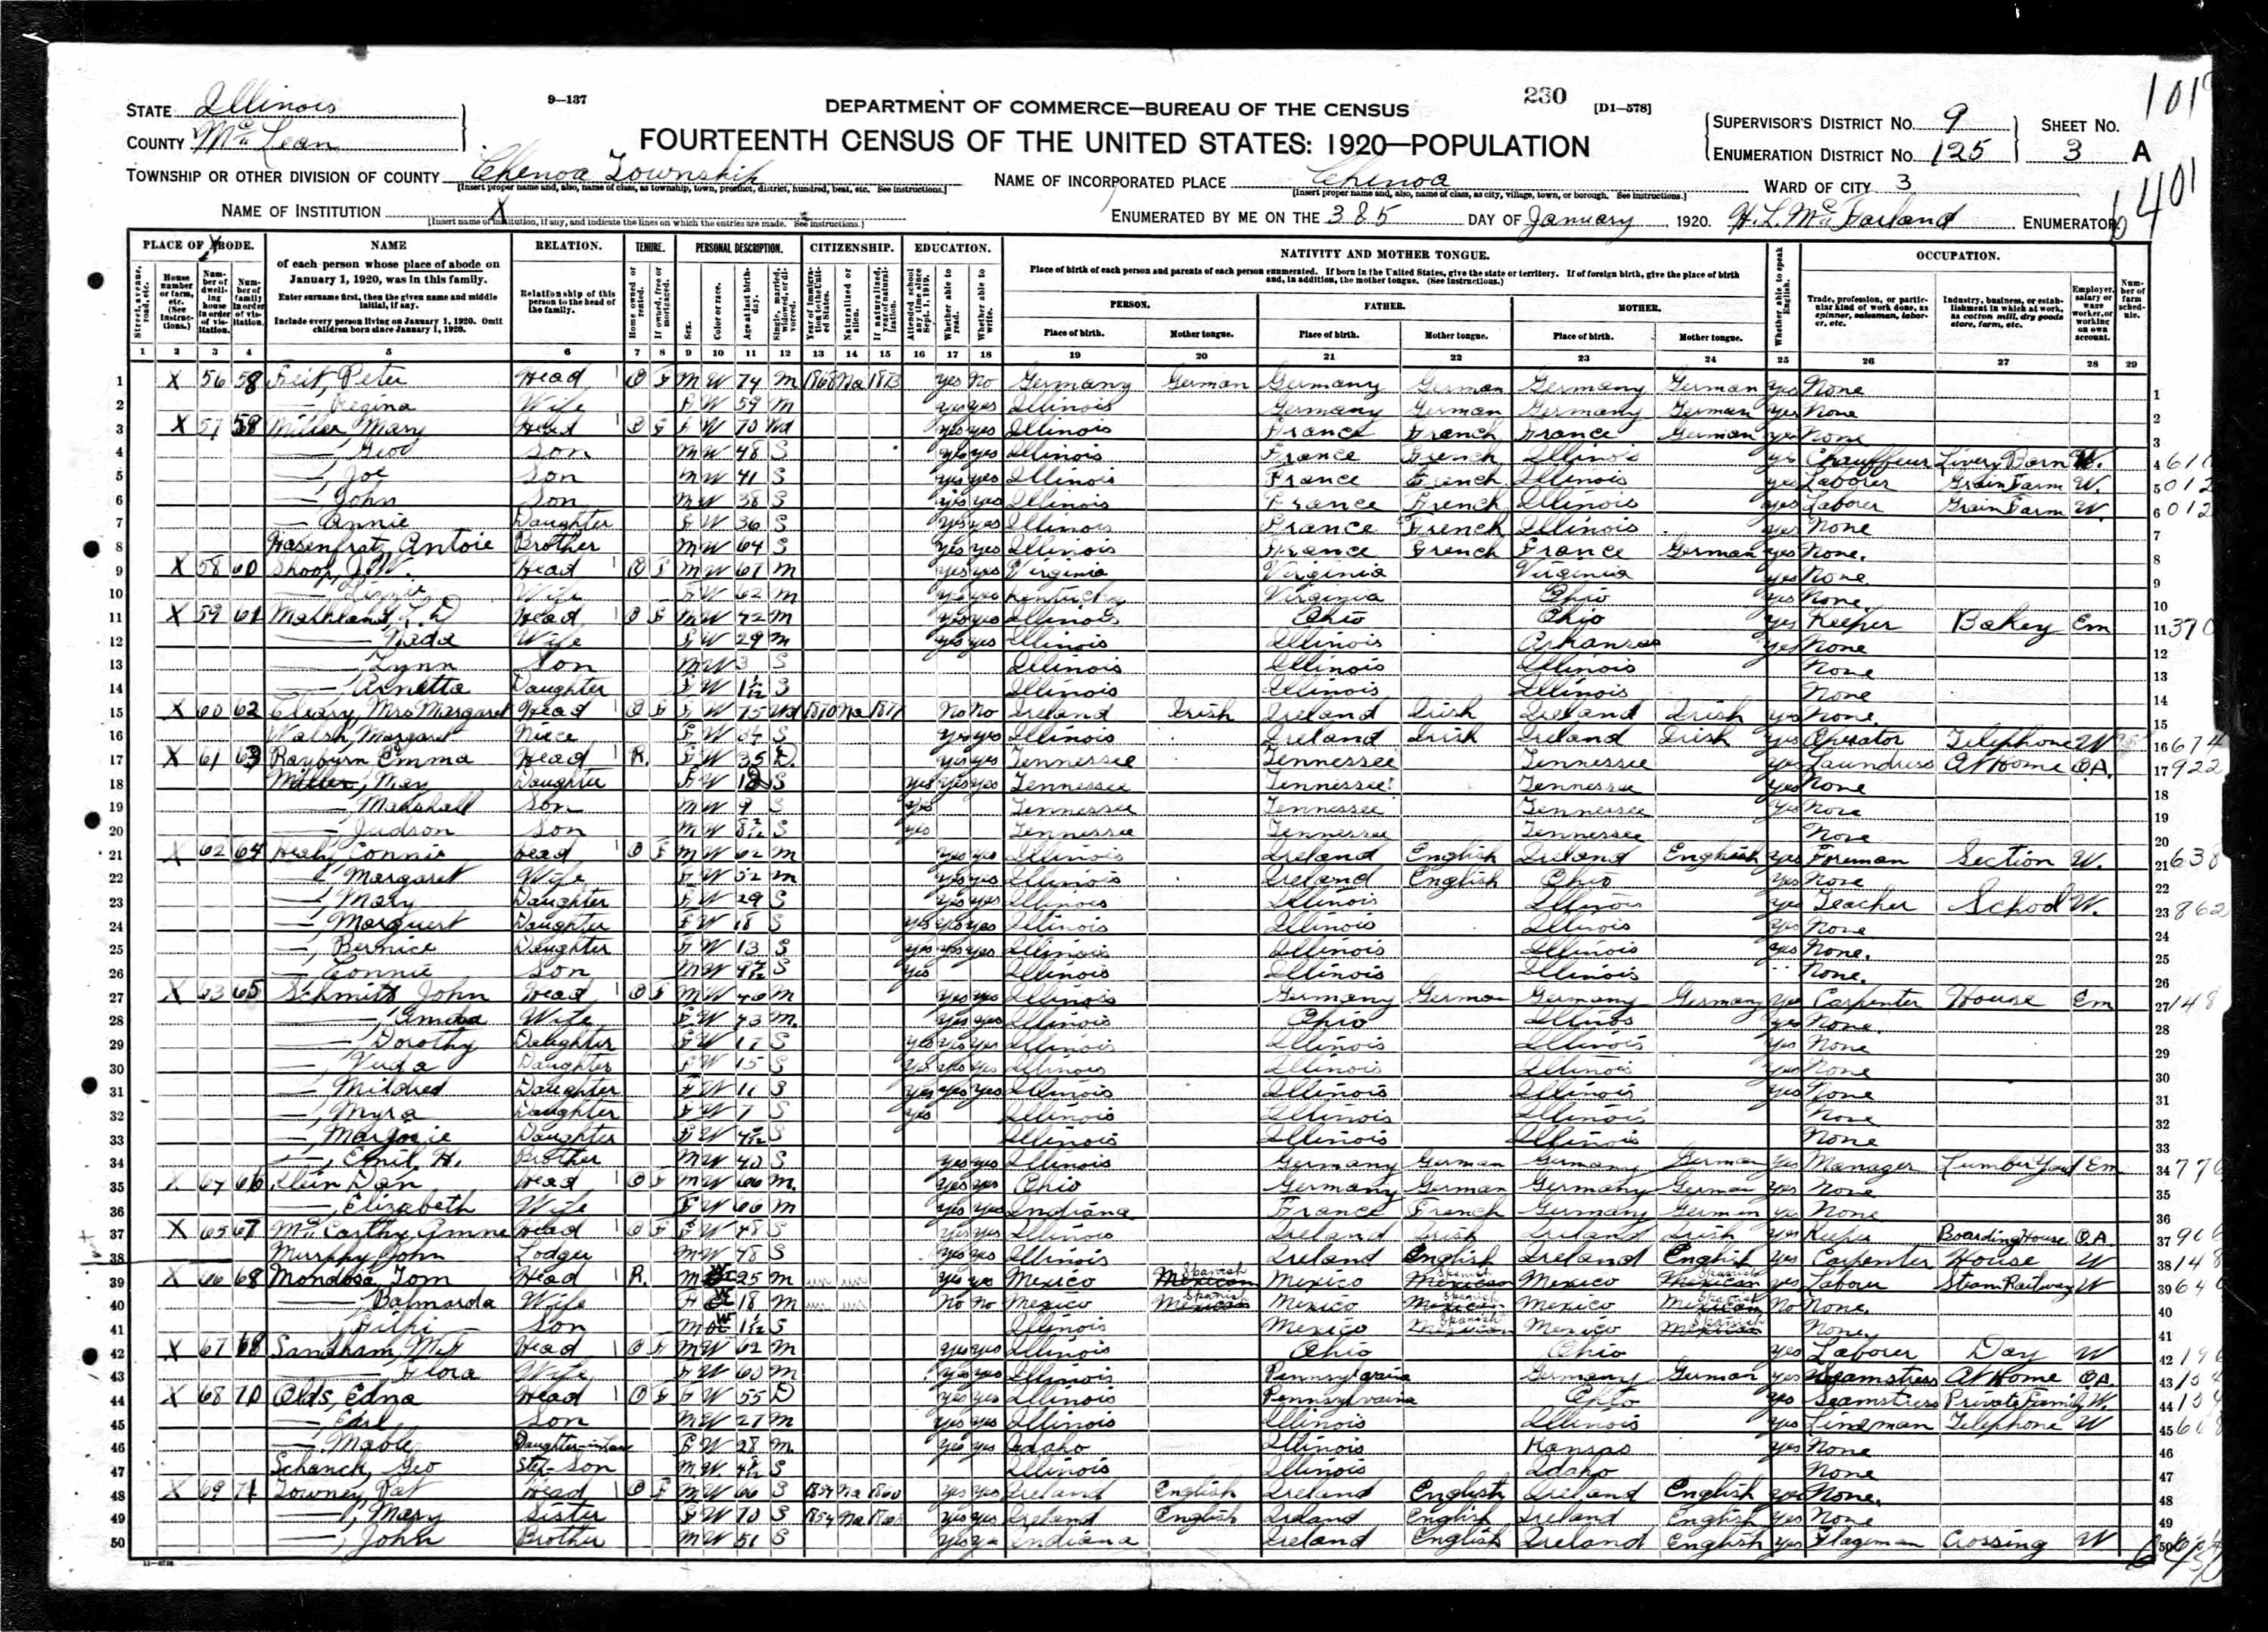 Page 3A of 1920 census